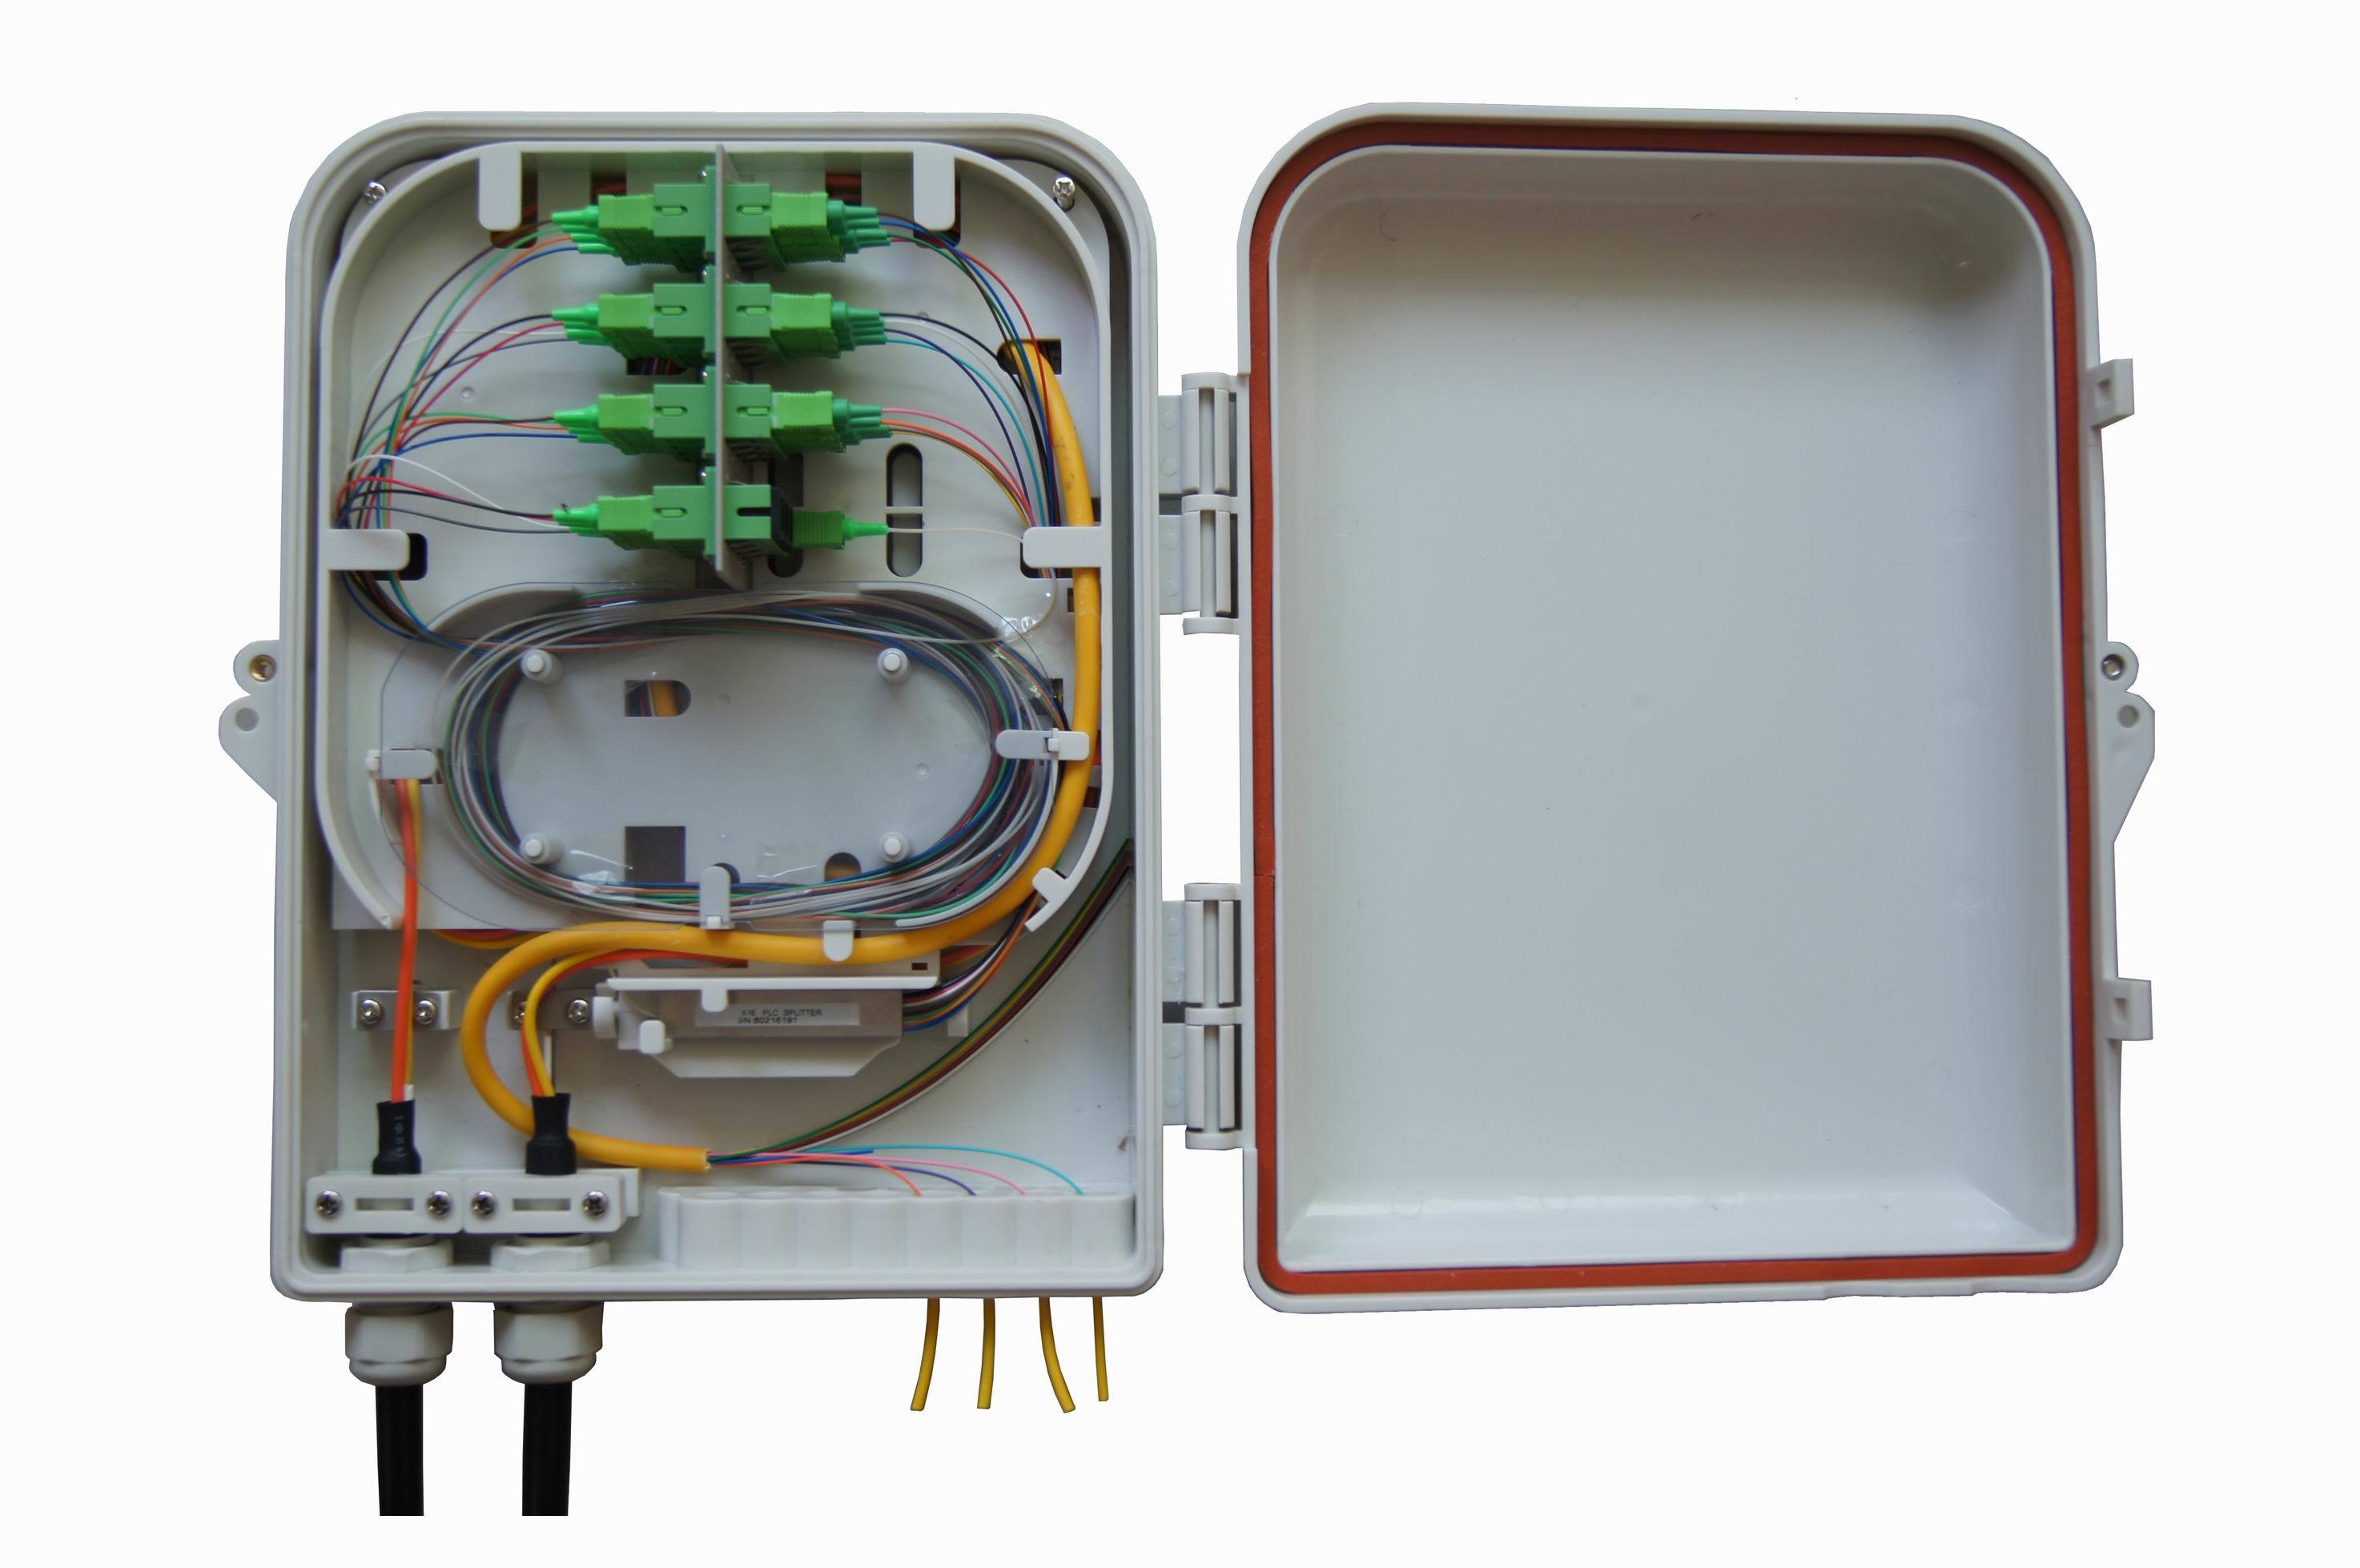 How Outdoor Fiber Optic Distribution Boxes Enhance Communication Infrastructure